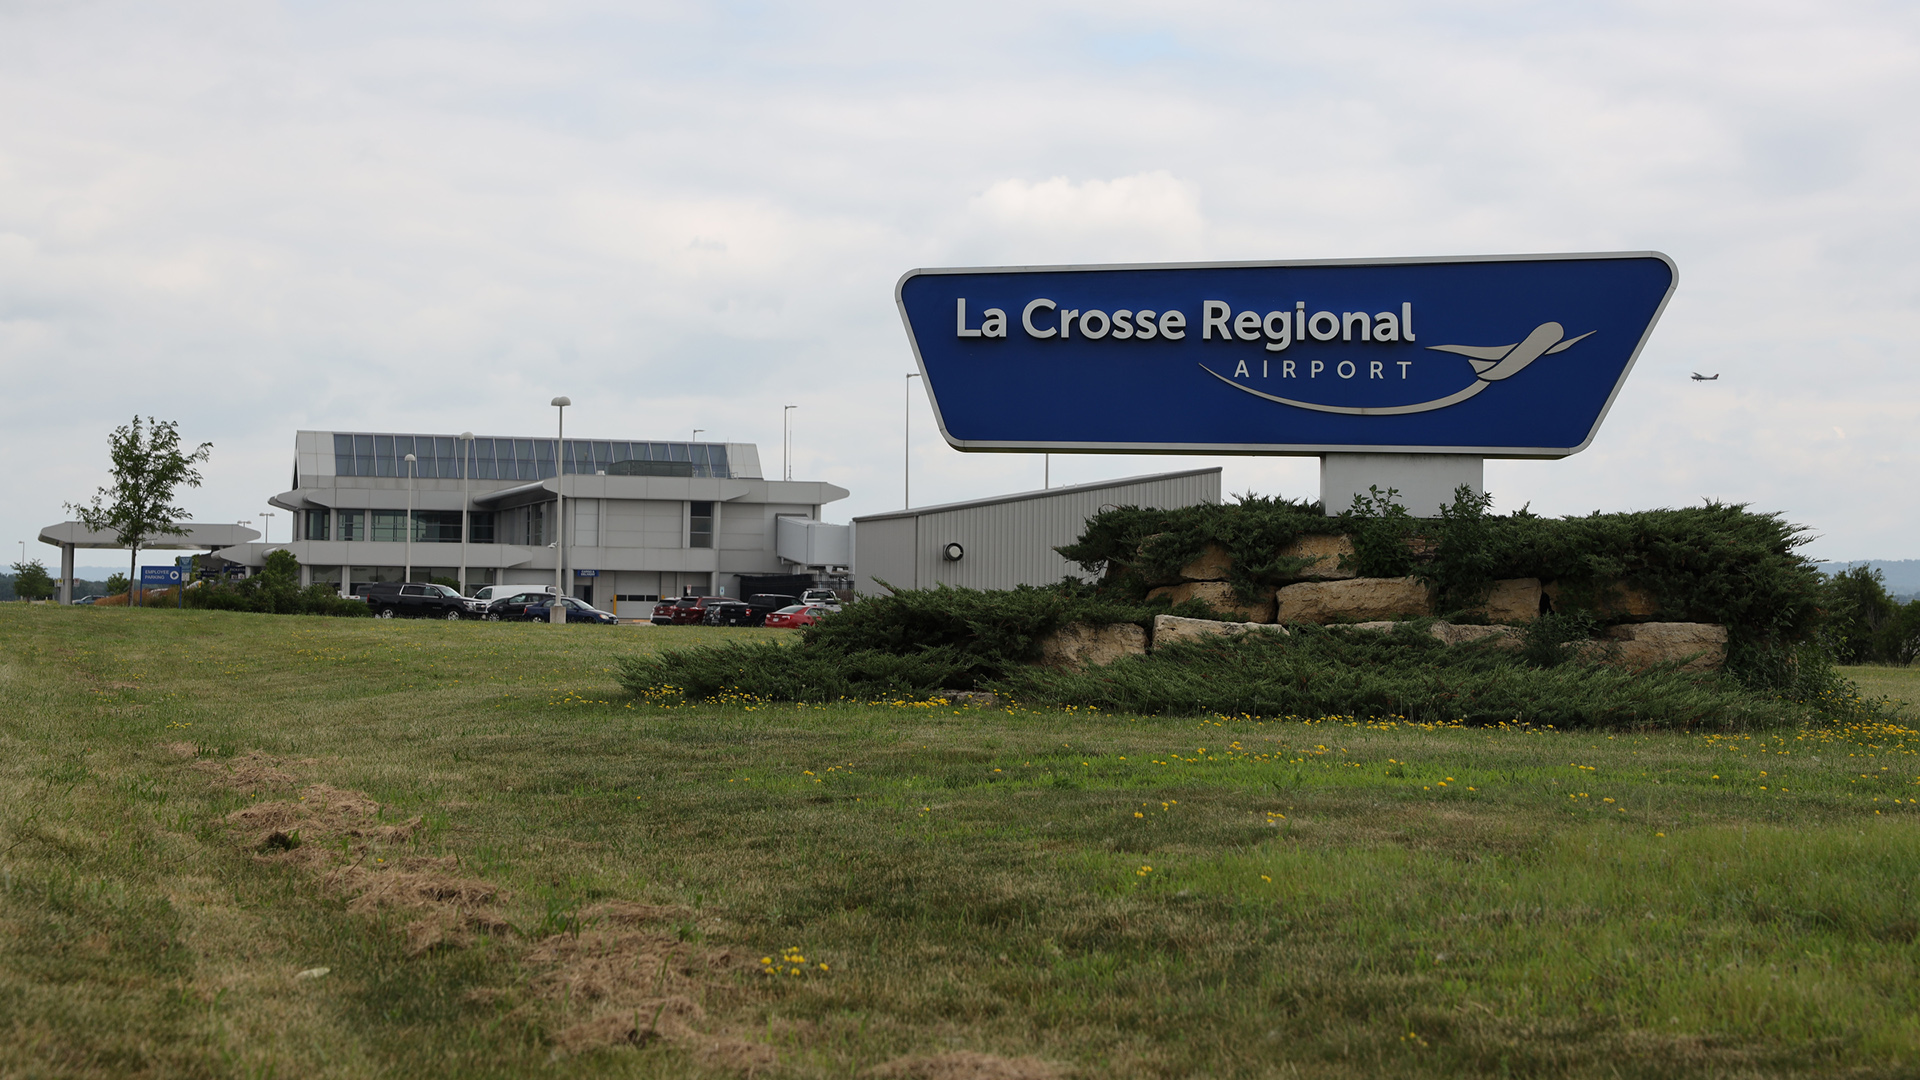 A sign reading "La Crosse Regional Airport" with a stylized graphic of a plane in flight stands in front of a multi-story building and parking lot, with a grass lawn in the foreground and a small aircraft in the sky in the background.